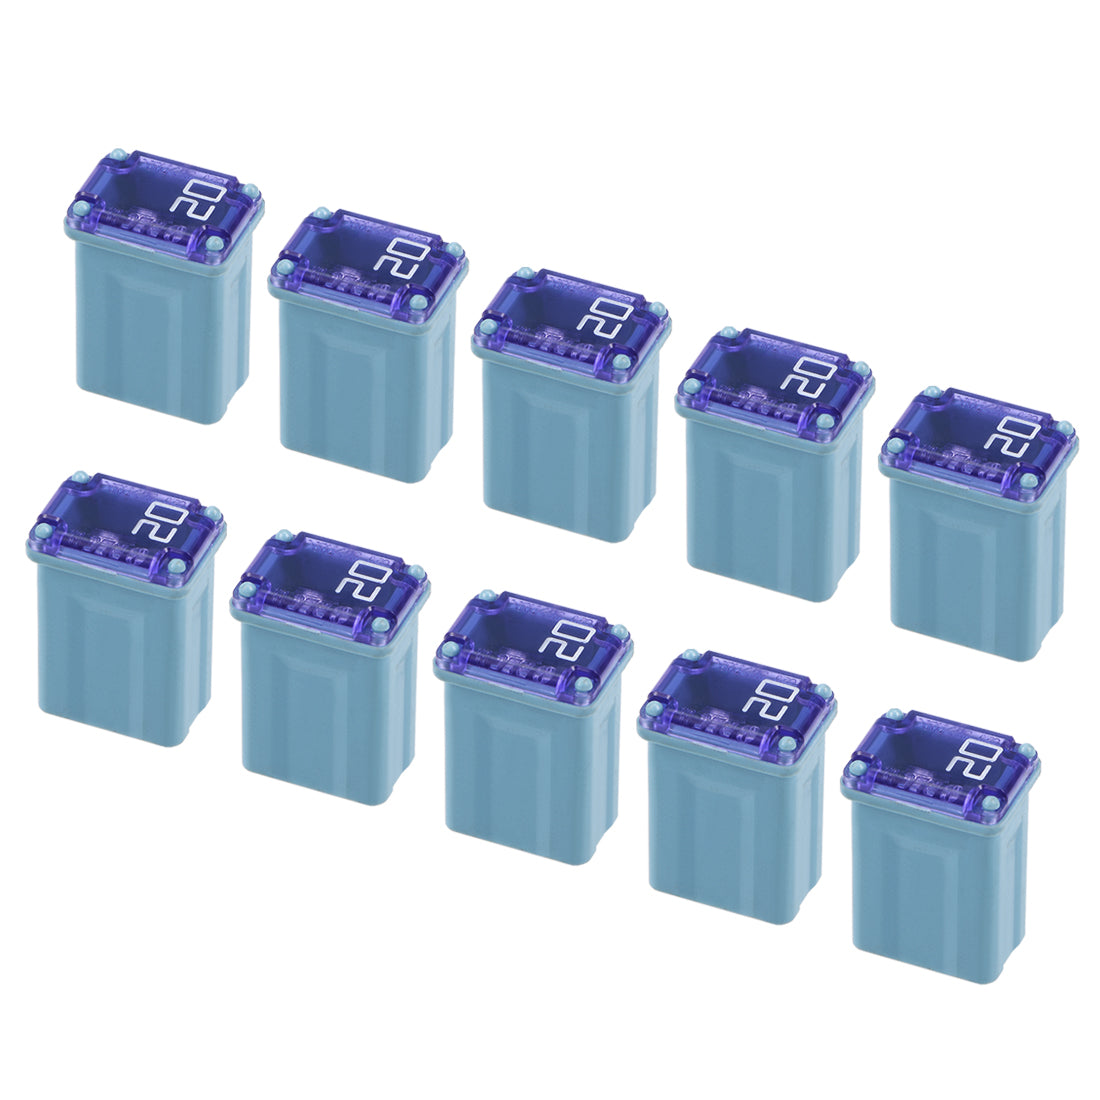 uxcell Uxcell Automotive Mini Cartridge Fuses 32V 20A Female Terminal  Case Box for Car Truck 10pcs